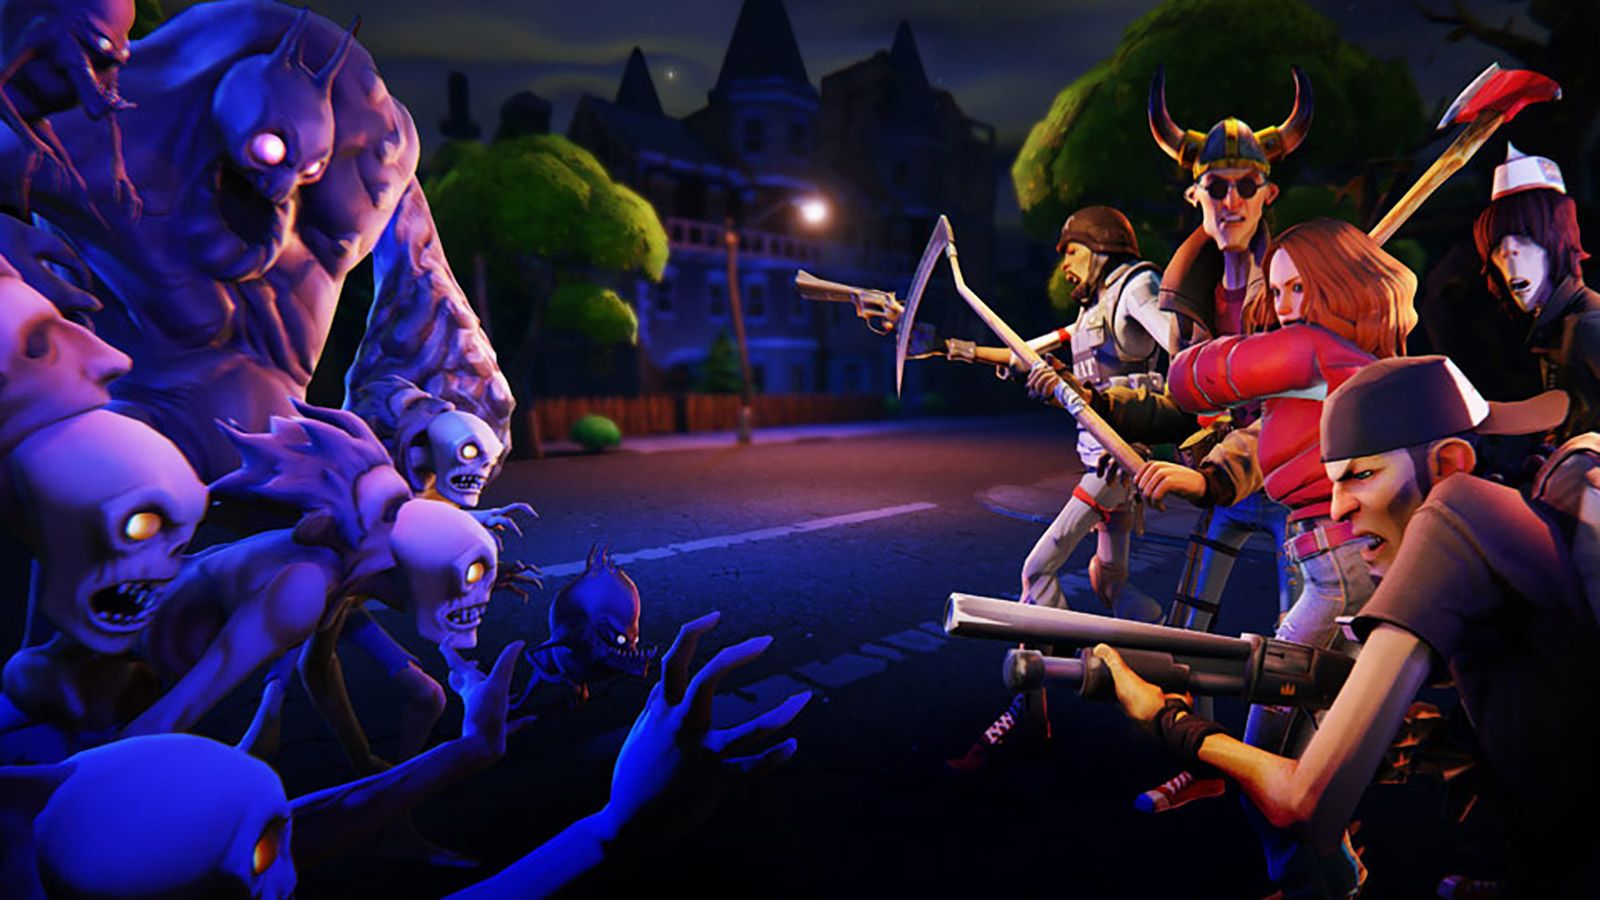 Scammers Target Young Fortnite Players With Fake Offers for Free V